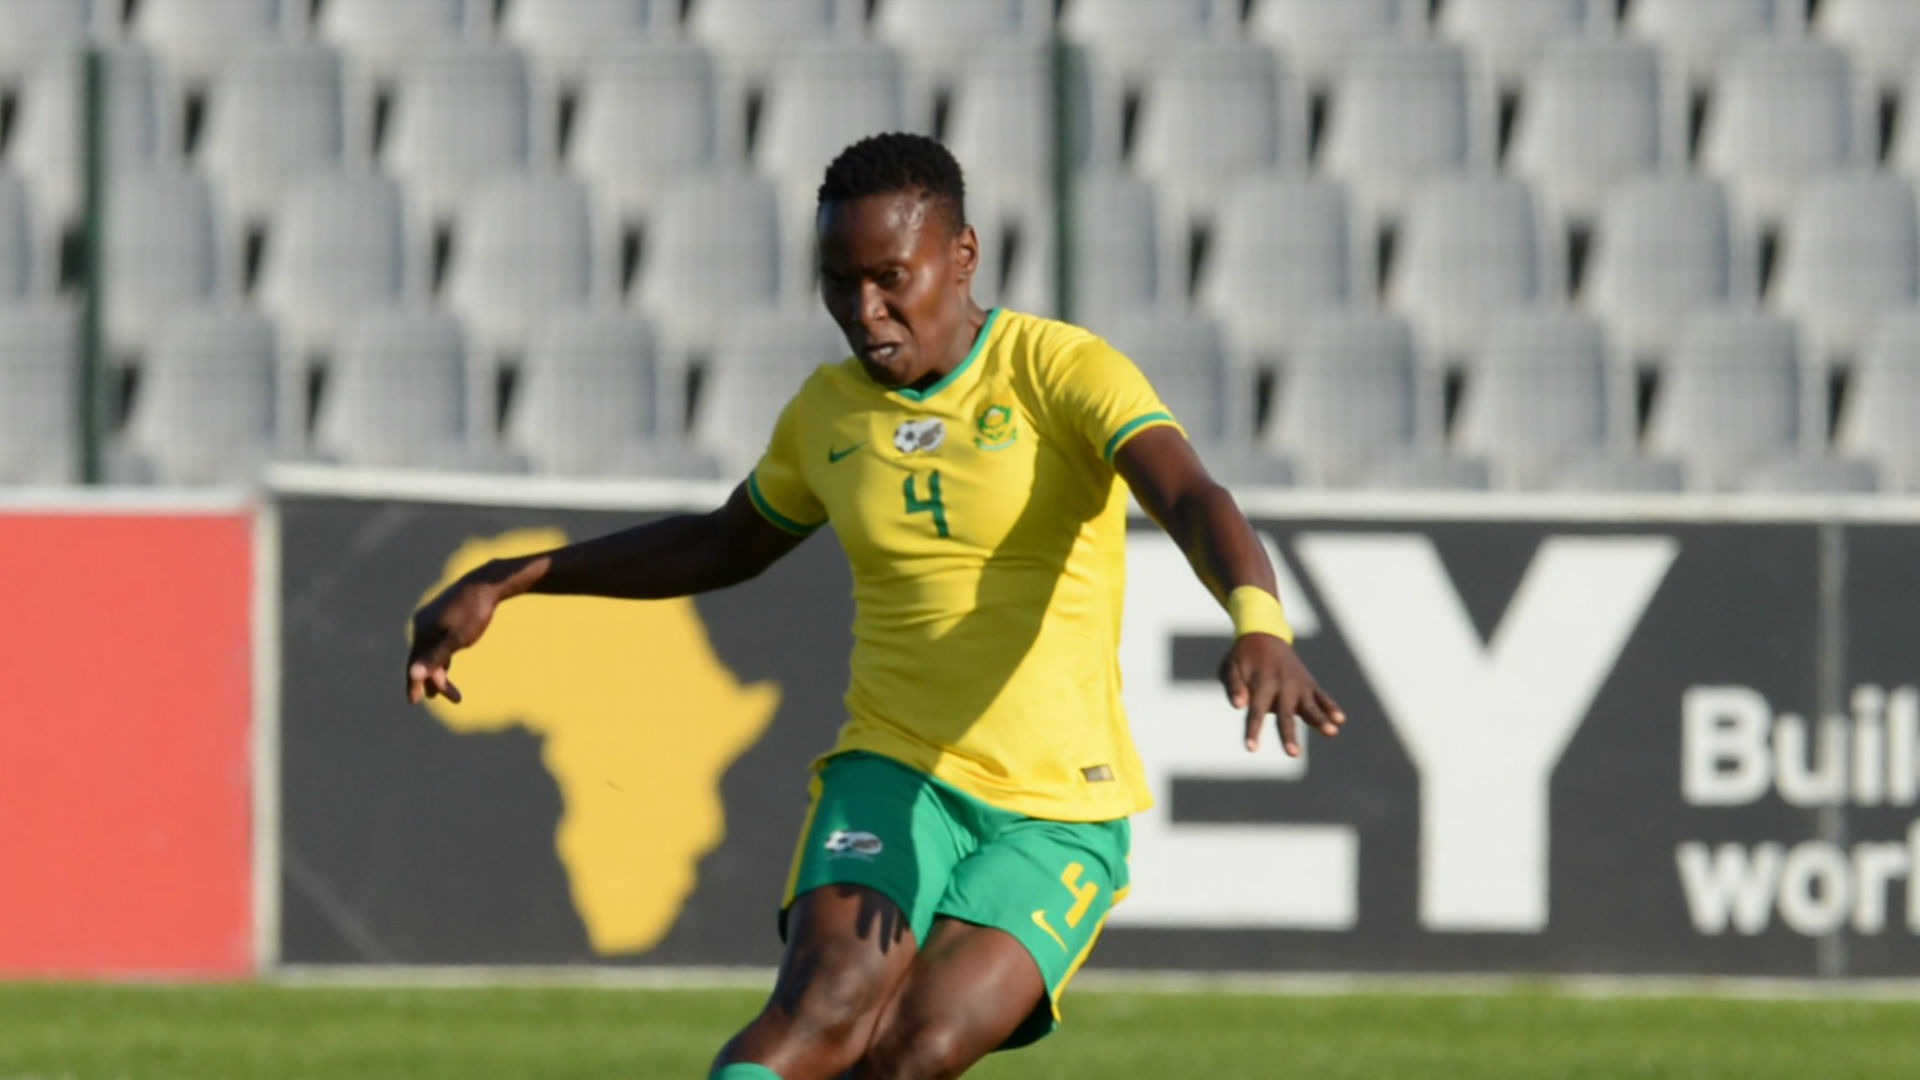 'This is the reward' - Banyana star Matlou excited to join Eibar